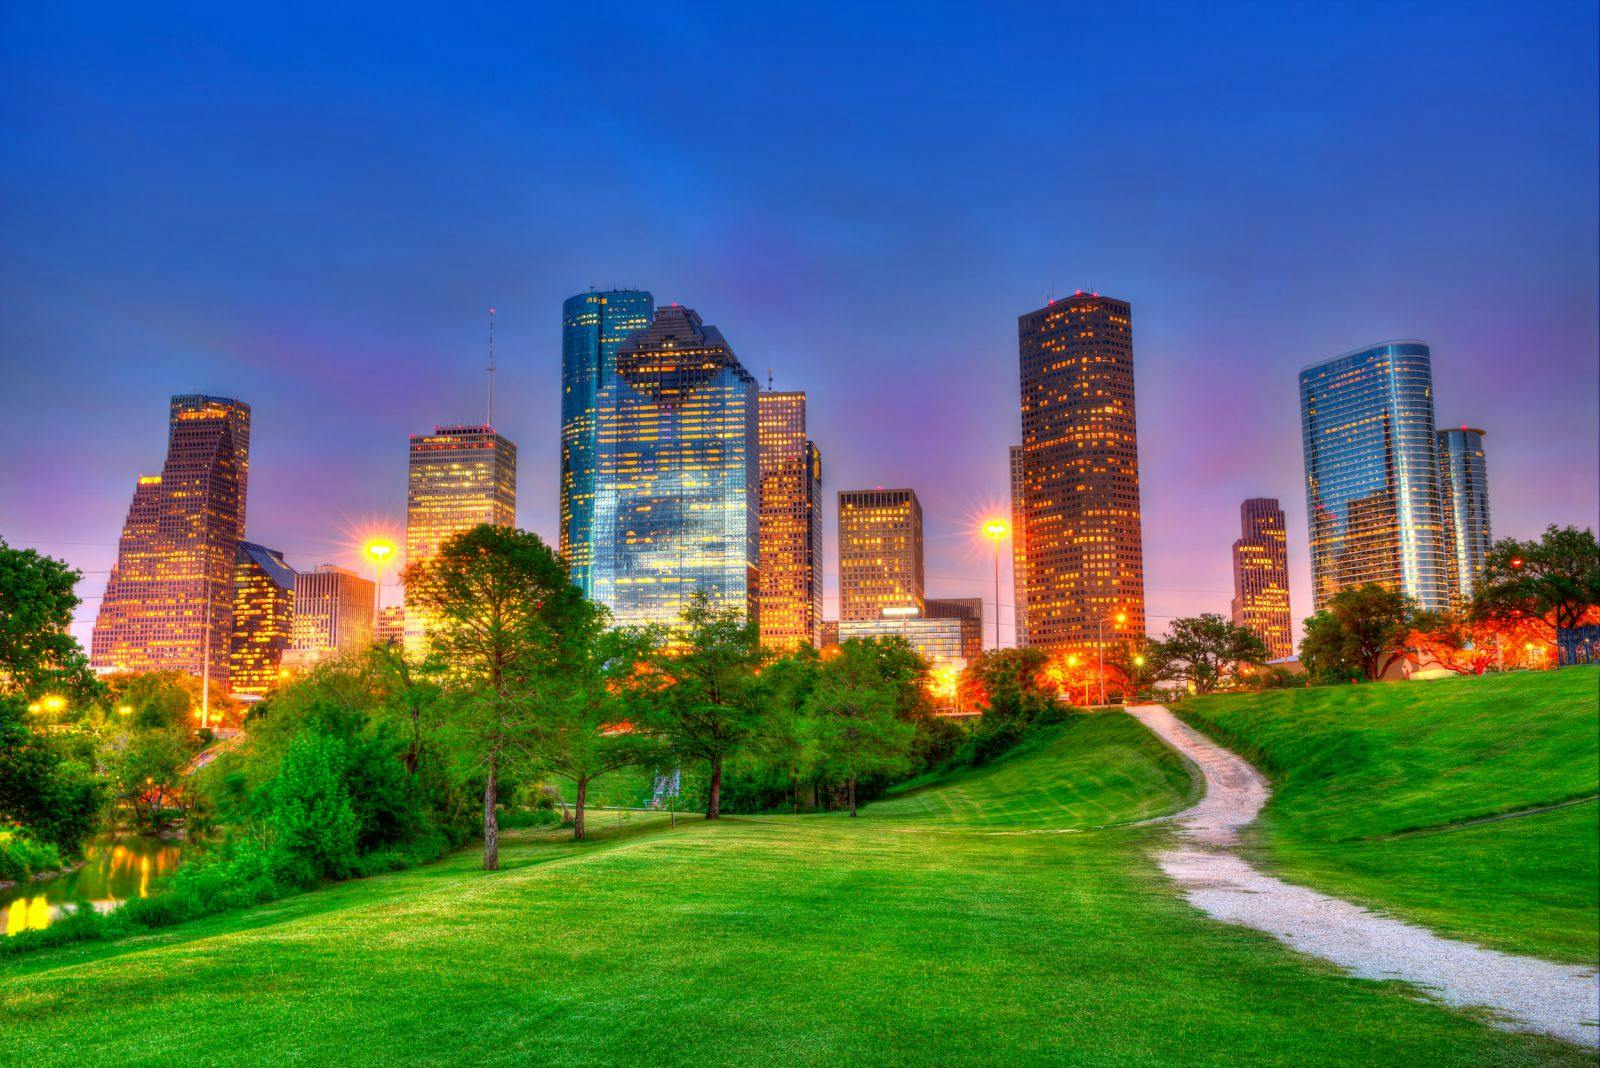 Picture of Houston